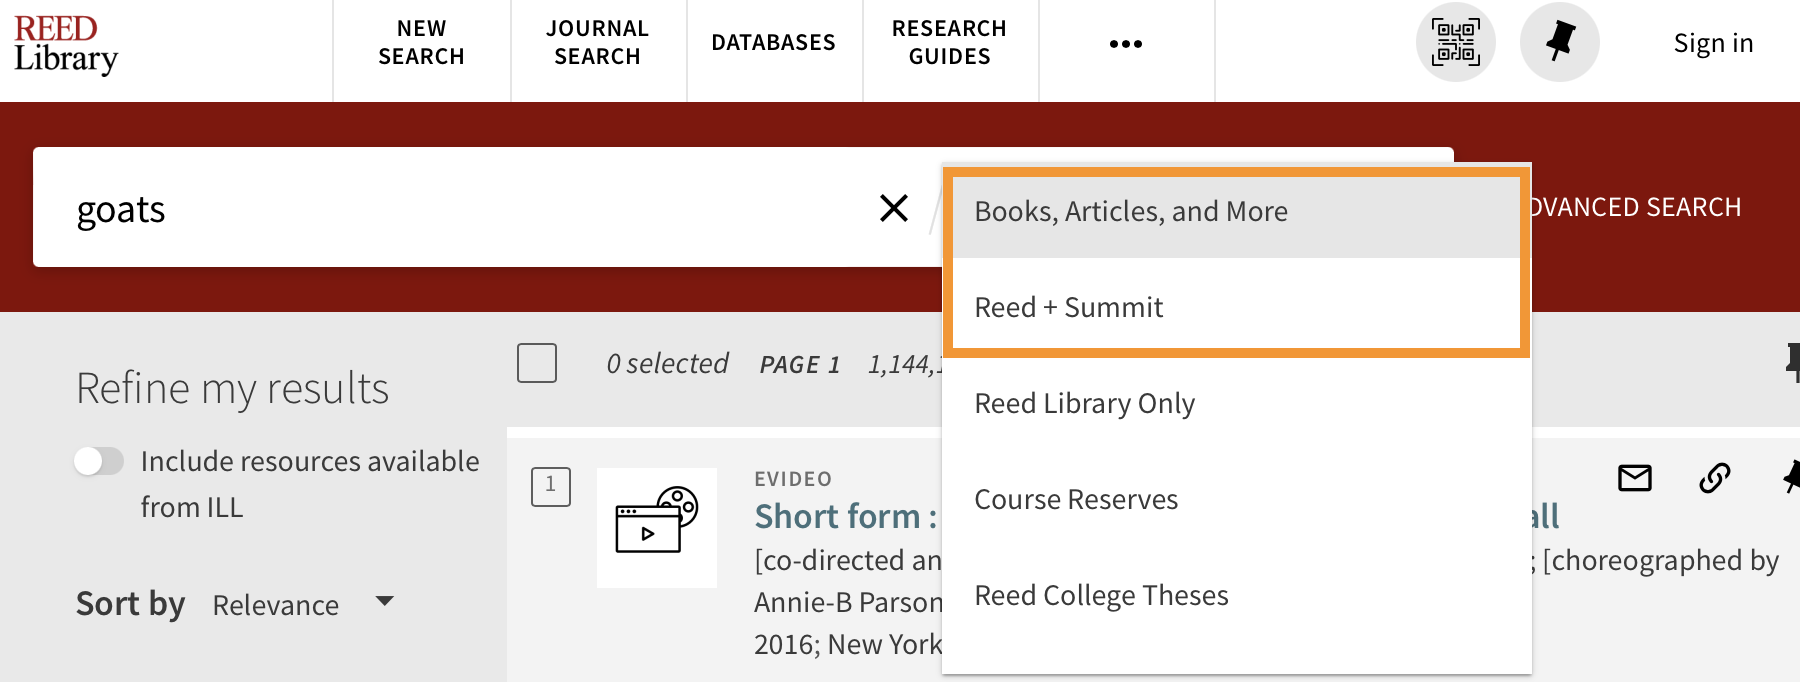 screenshot of Reed catalog search with "Books, Articles, and More&quot and Reed + Summit; dropdowns circled.